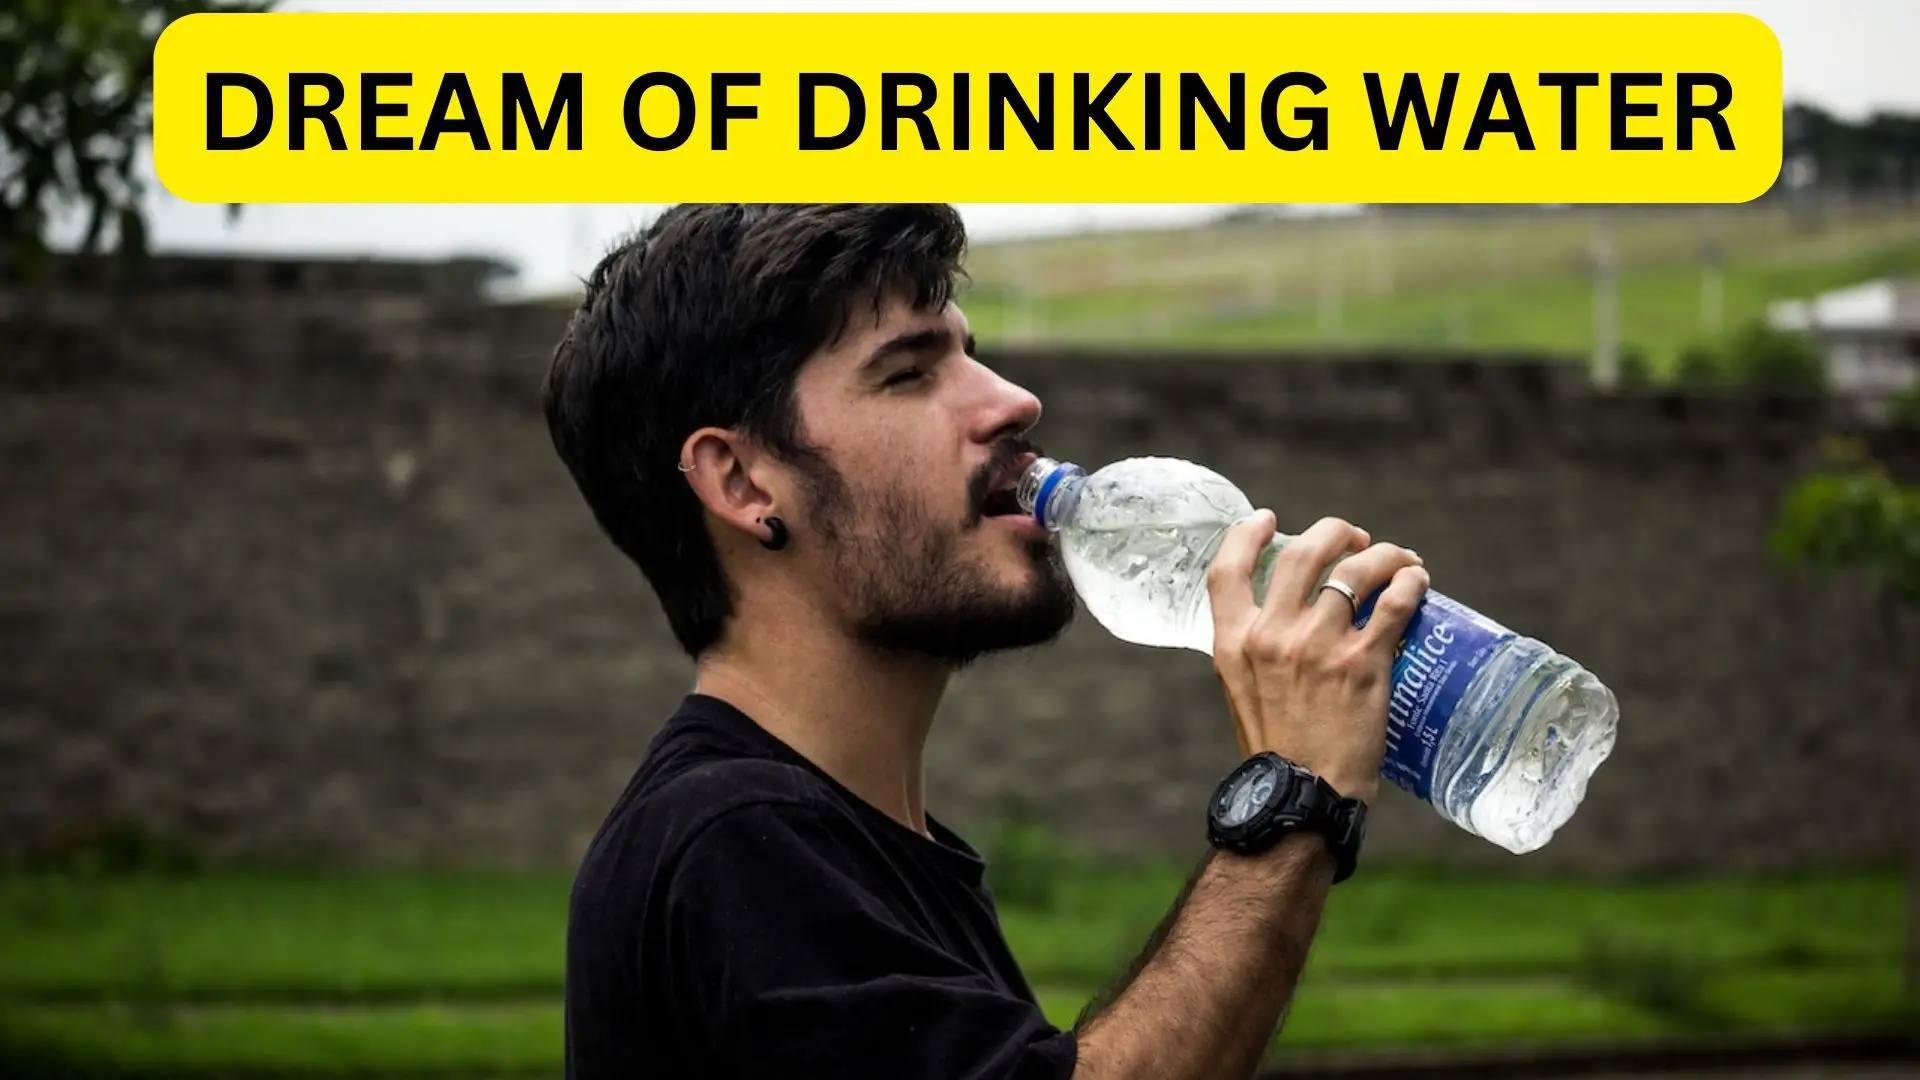 The Spiritual Message Of Drinking Water Dreams